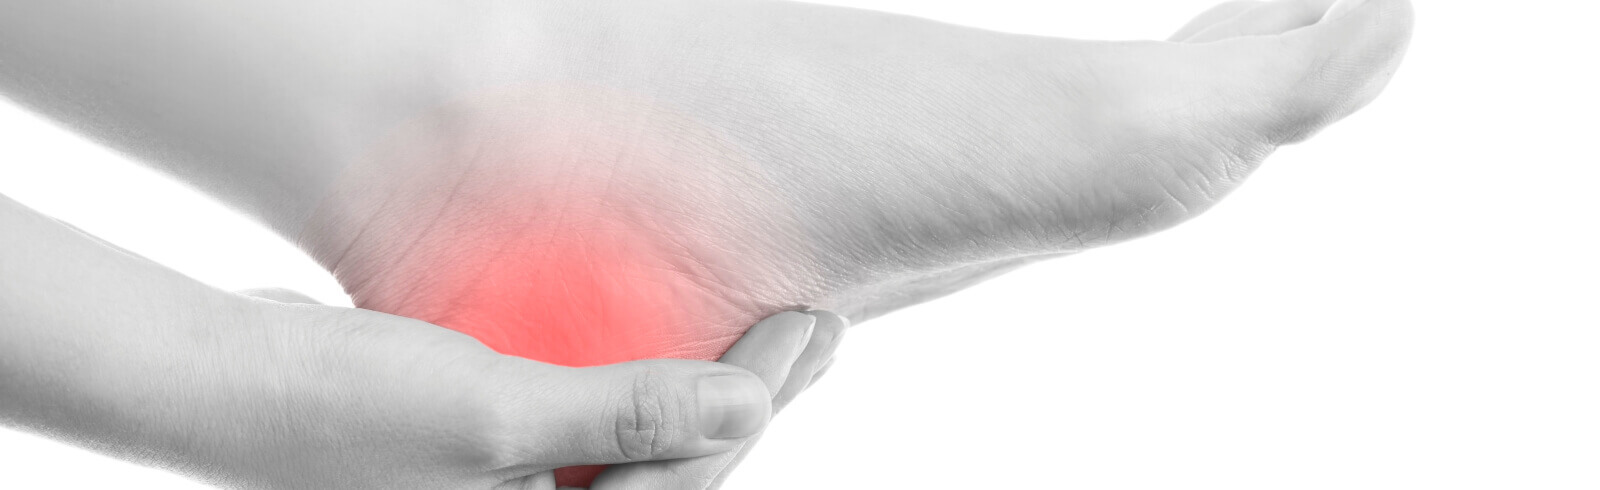 The Orthopaedic Centre - There are many factors that can cause heel pain,  but one of the most common causes is plantar fasciitis. The plantar fascia  is a ligament that runs underneath